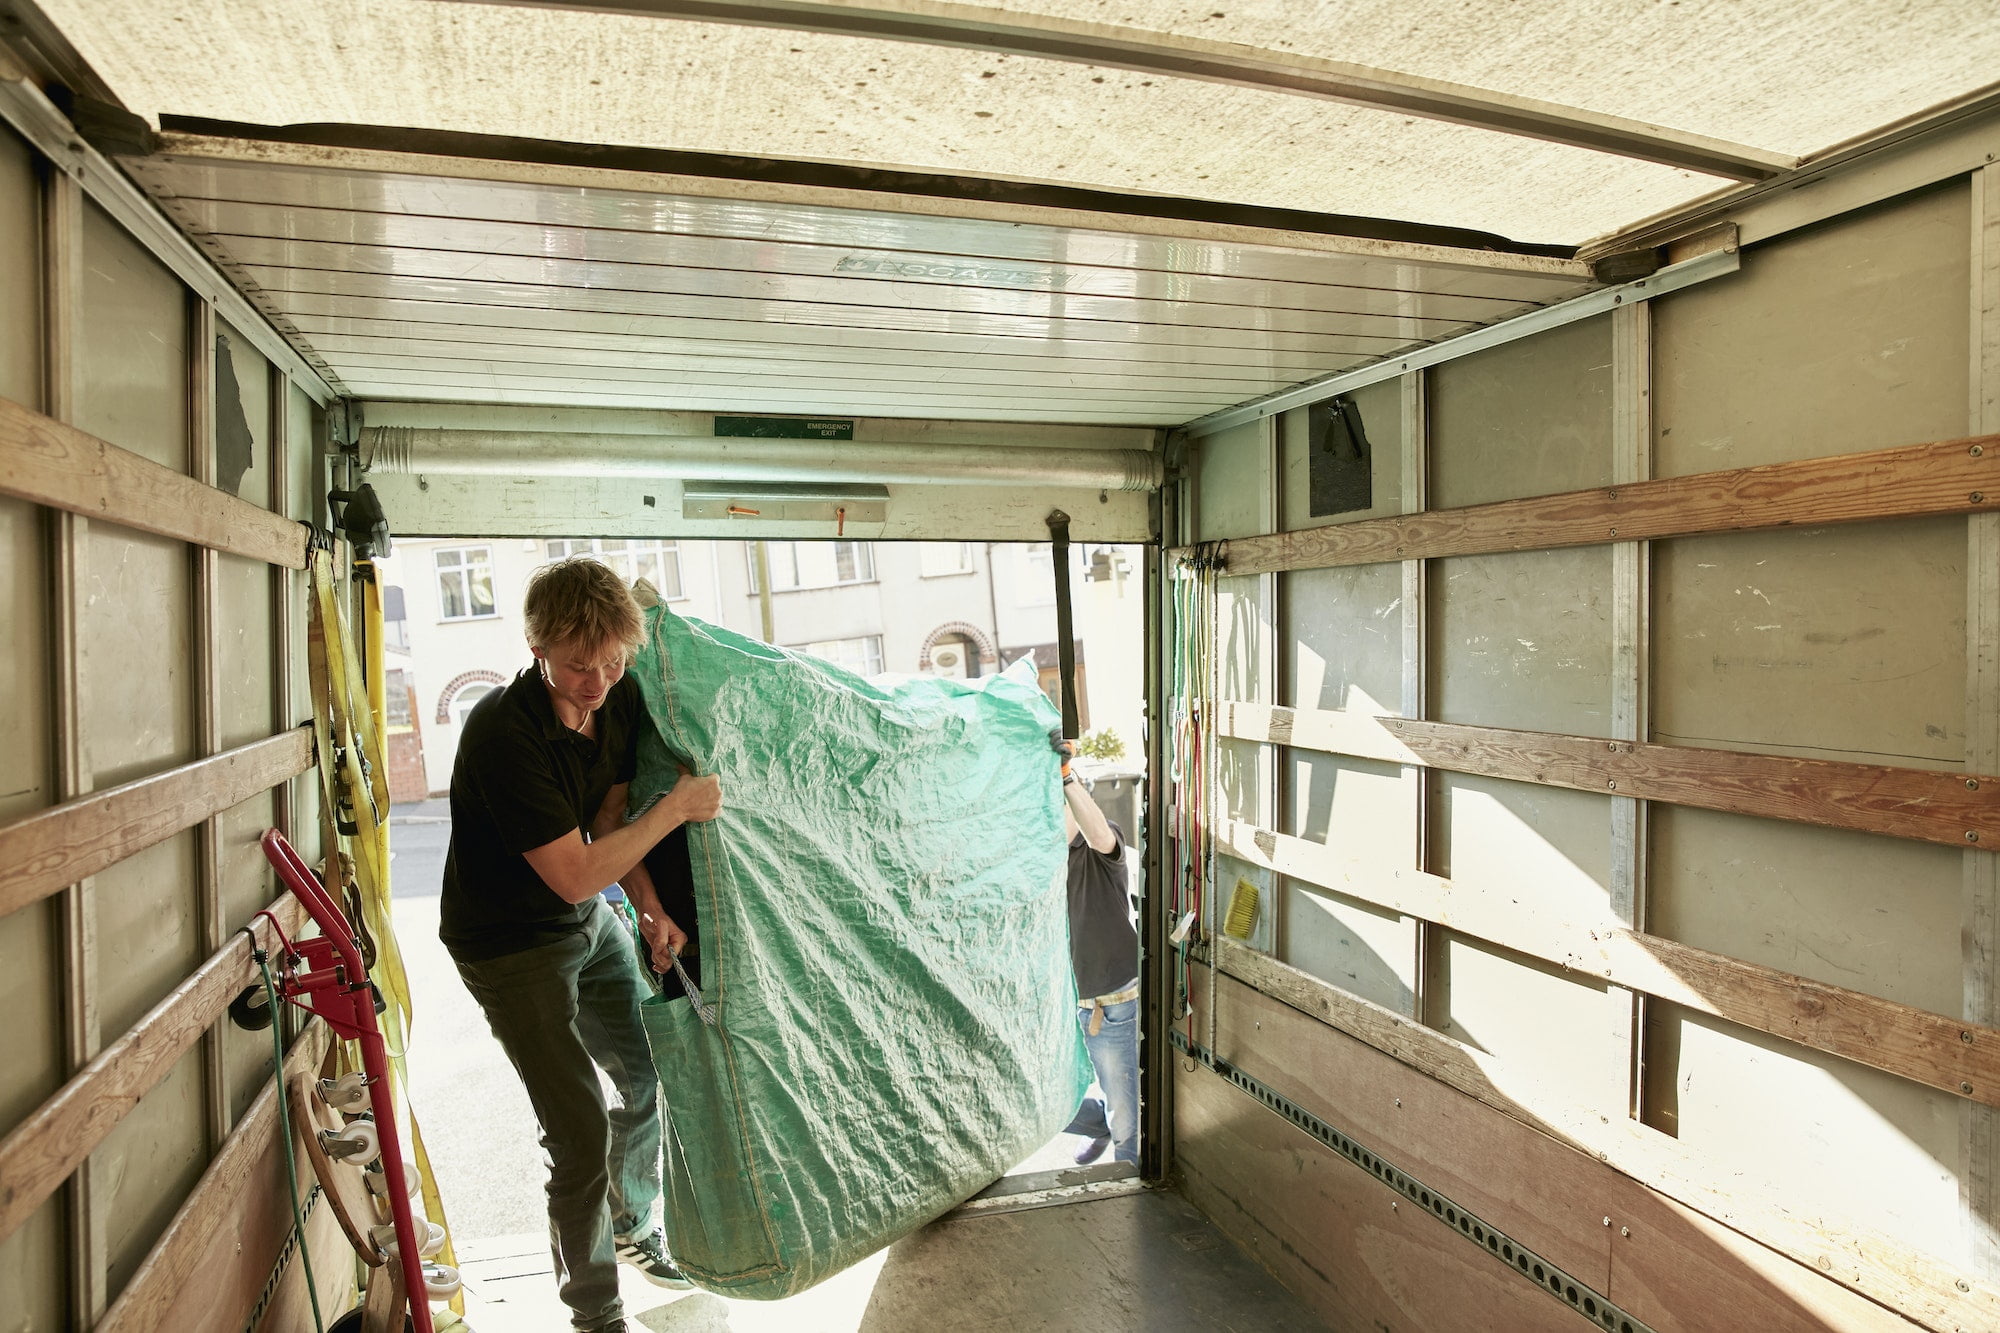 Removals business. A man lifting an item of furniture covered in green plastic into a removals van.